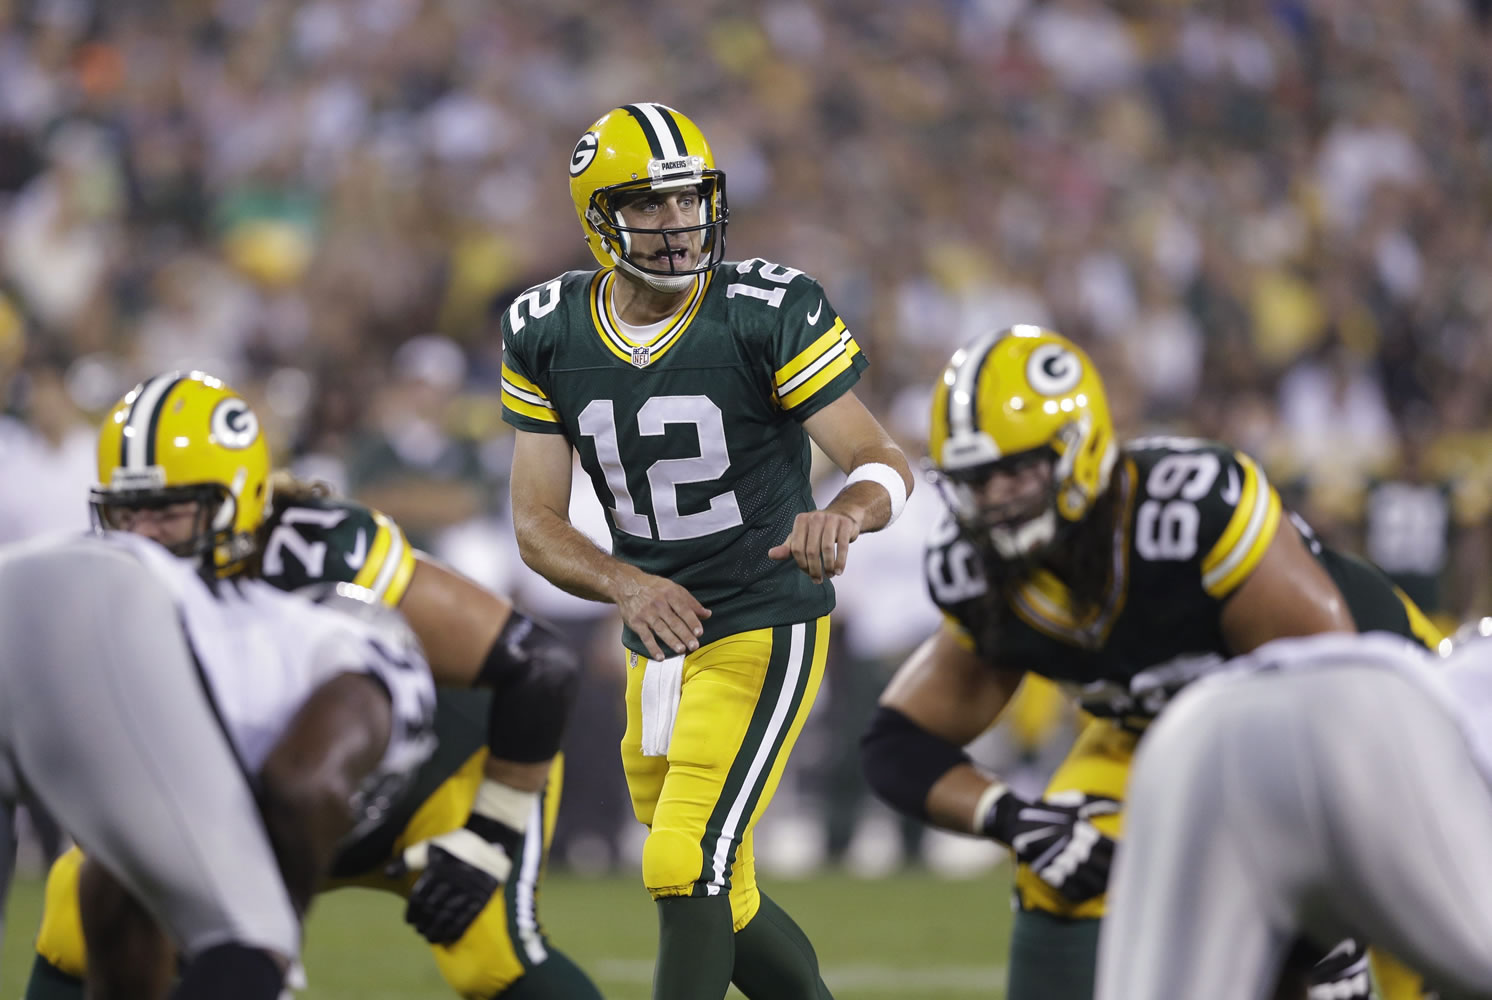 Green Bay Packers quarterback Aaron Rodgers approaches the line of scrimmage during a preseason football game against the Oakland Raiders in Green Bay, Wis.